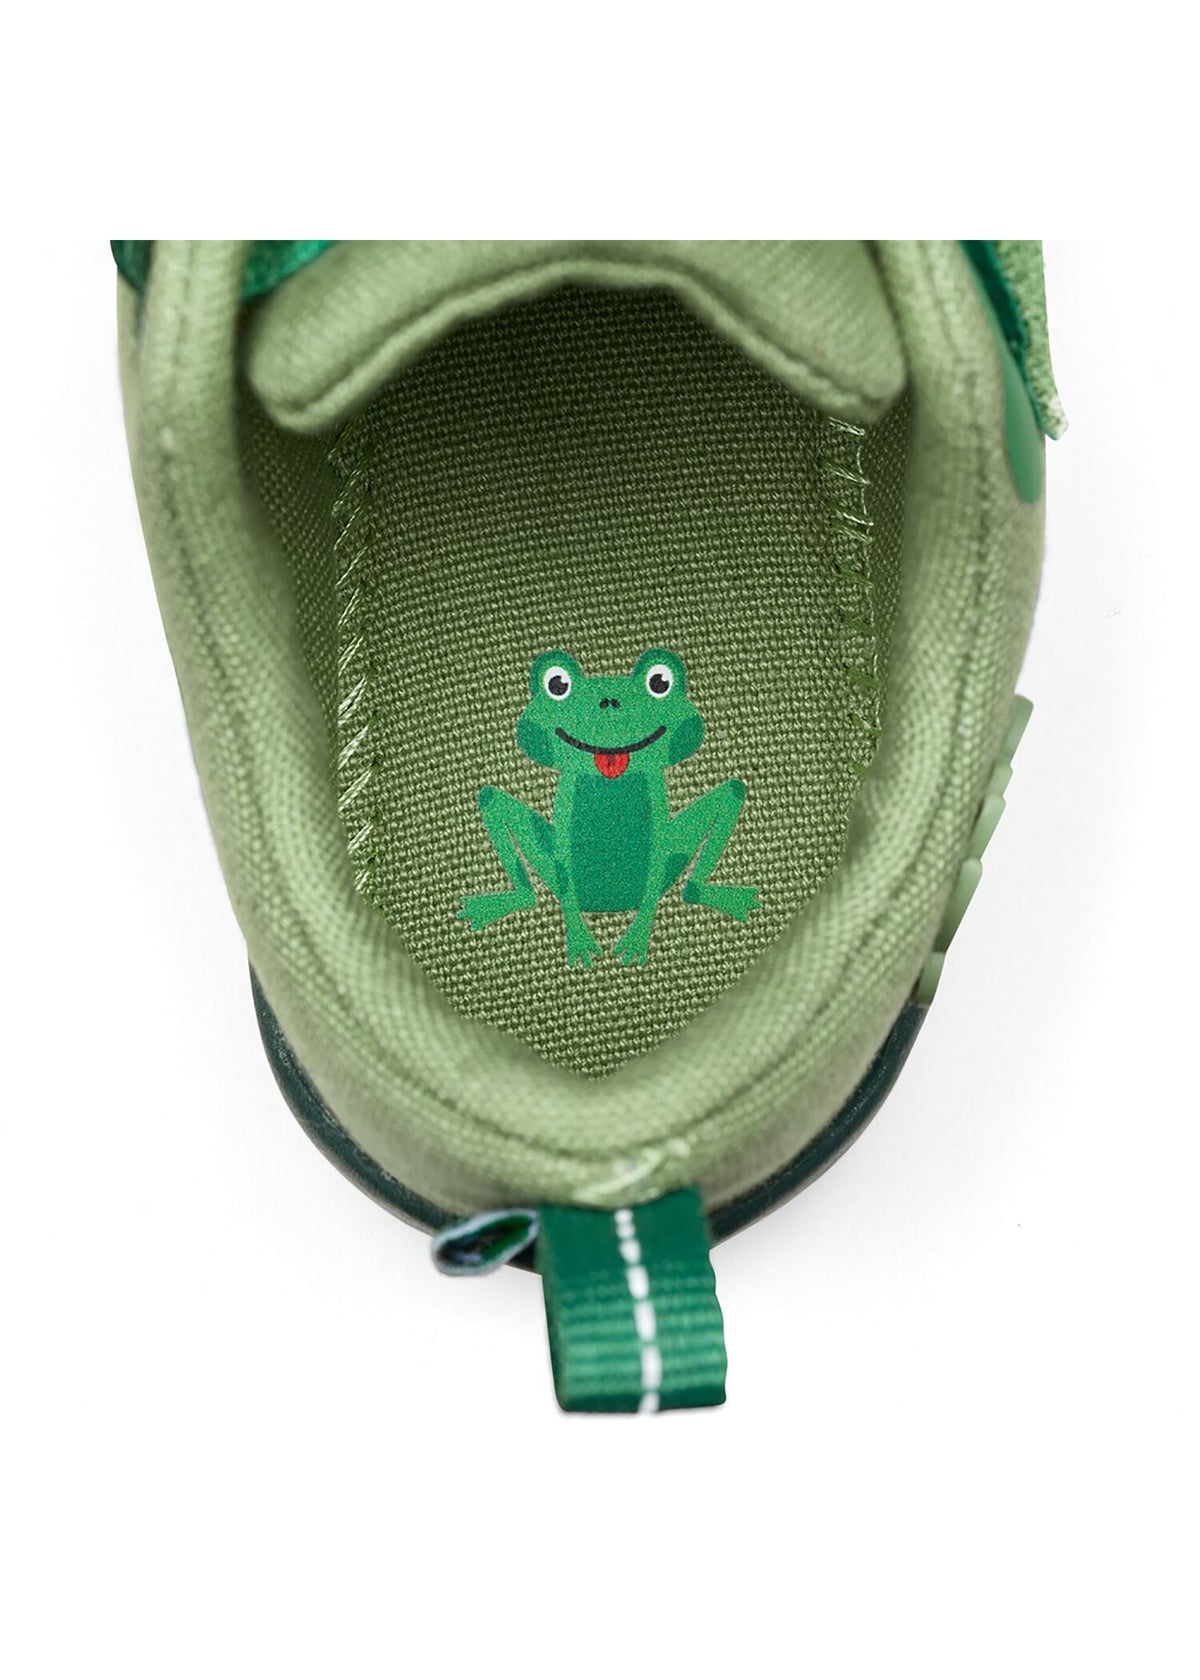 Children's barefoot sneakers - Cotton Lucky, Frog